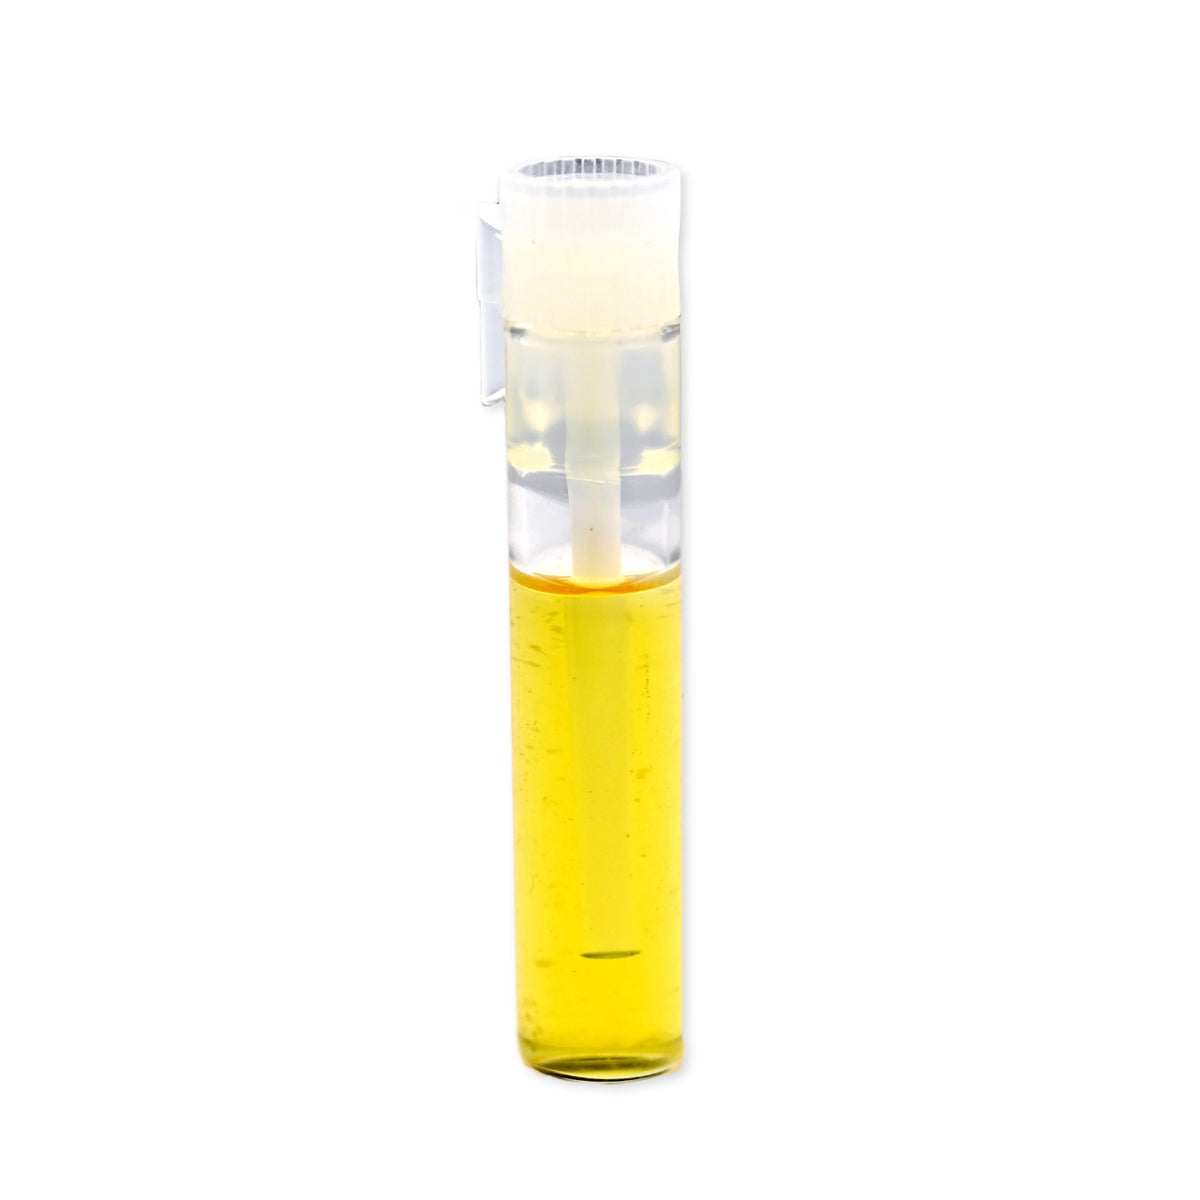 Hot Sales Various Sizes of Cylindrical Type Plastic Spirit Level Vial Water Bubble Level Vial Manufacturers and Suppliers China - Wholesale from Factory - Yijia Tools